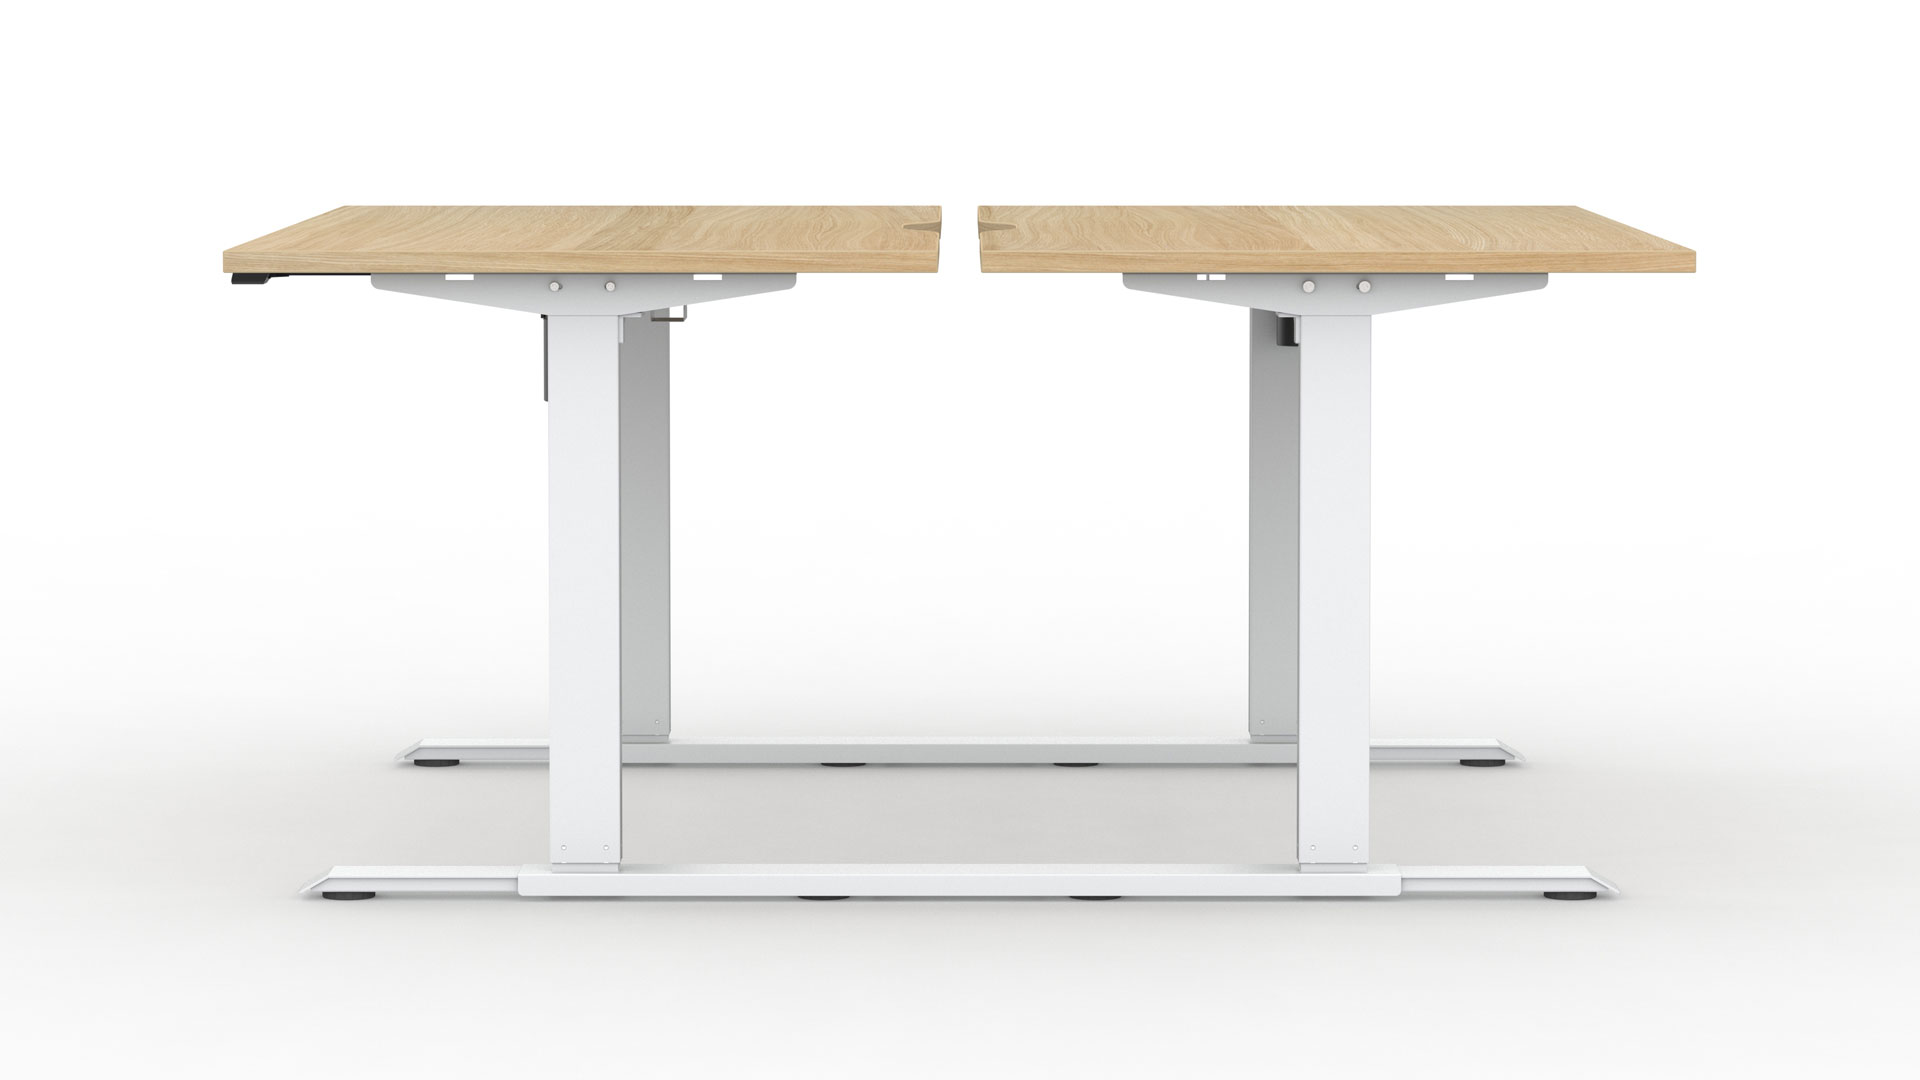 Alto 1 desk frames feature 2-stage rectangular columns with single motor